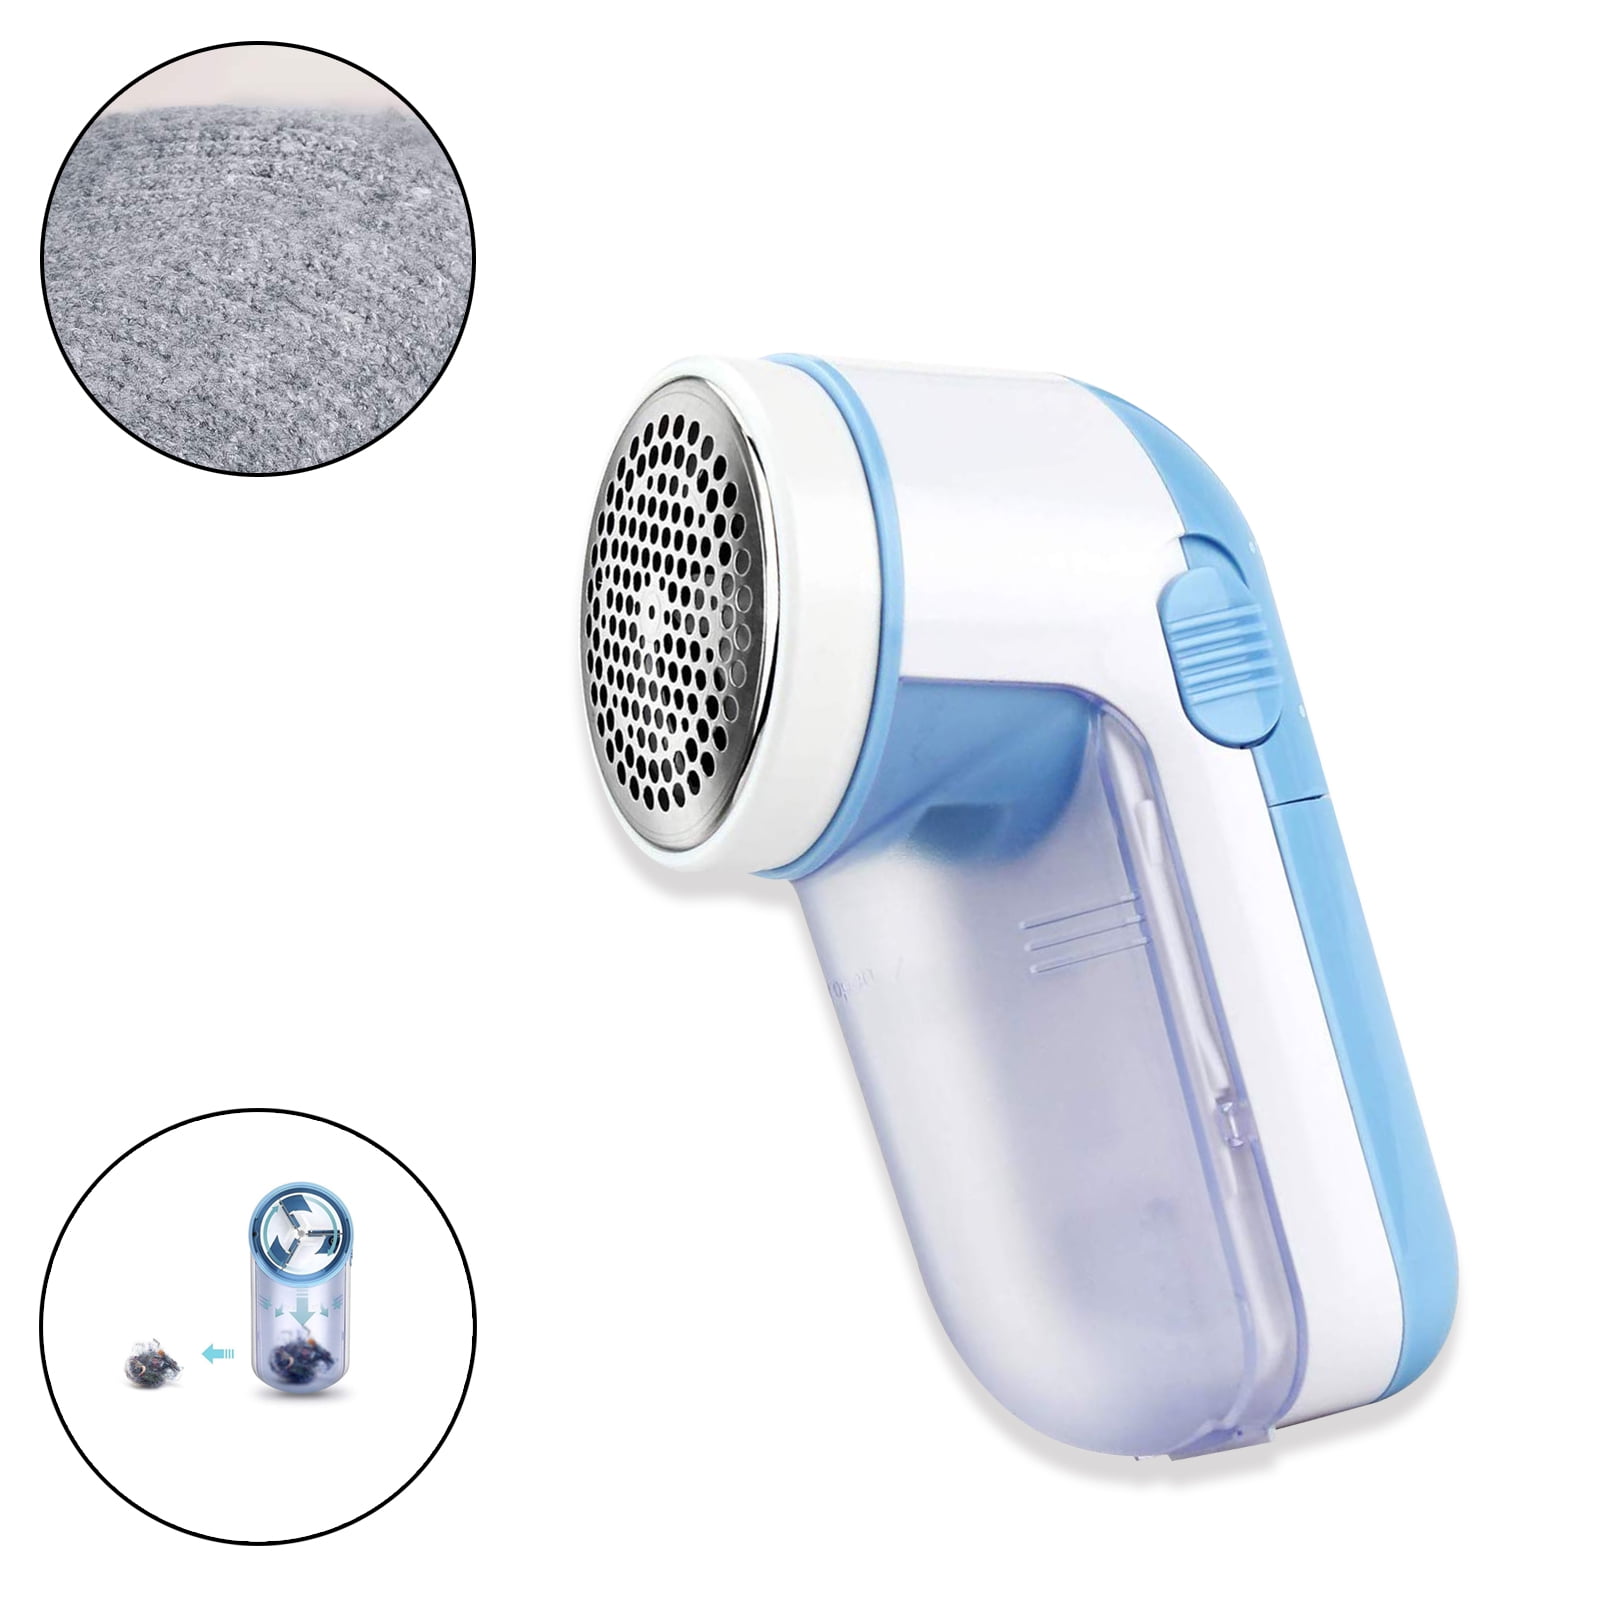 Battery Operated Portable Lint Remover Clothes Wool Sweater Fuzz Shaver 